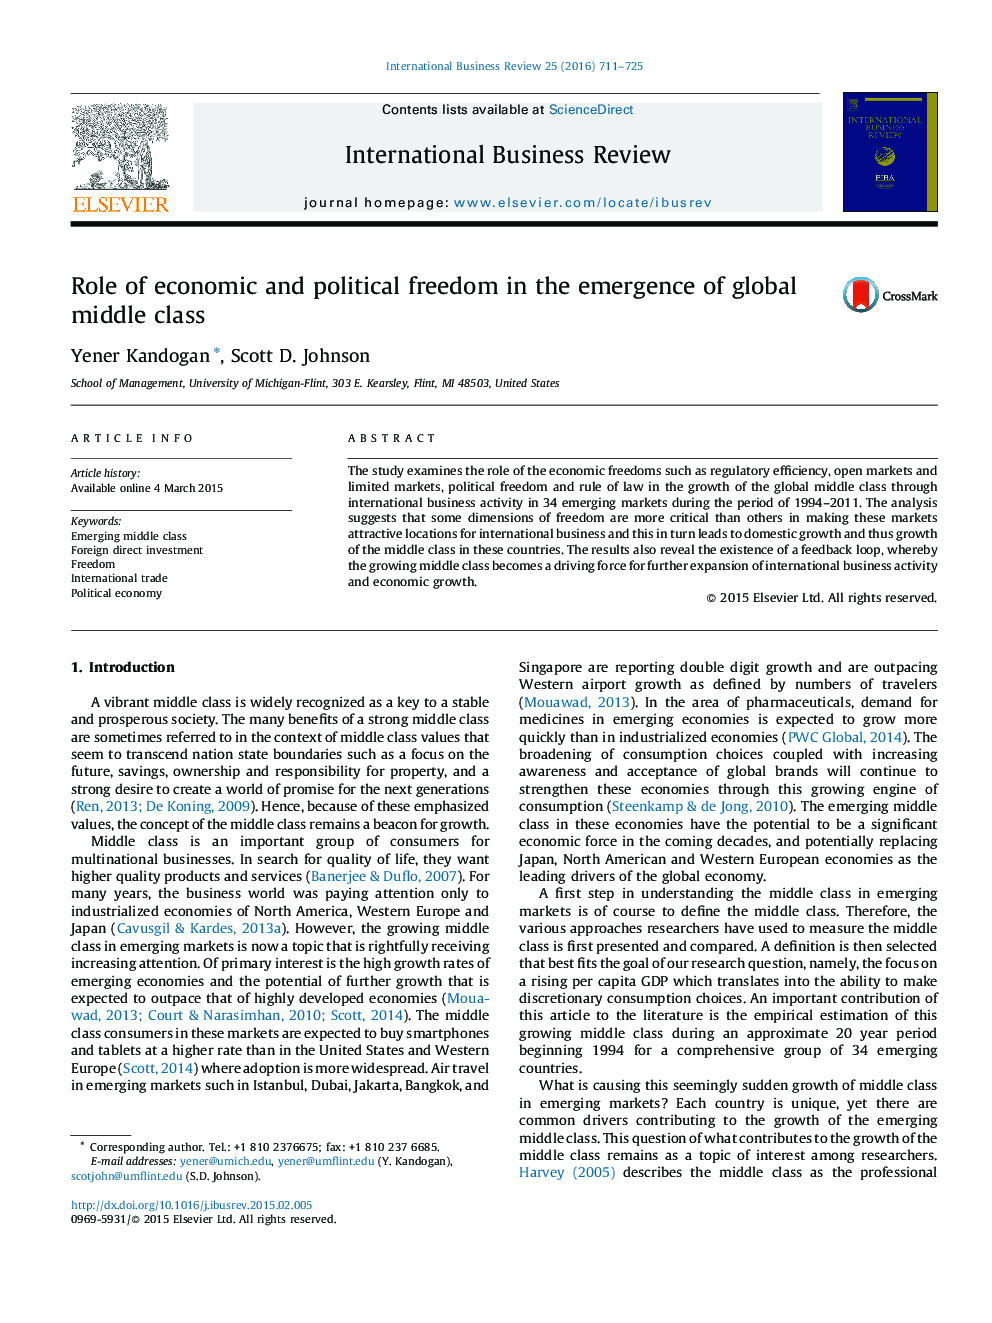 Role of economic and political freedom in the emergence of global middle class